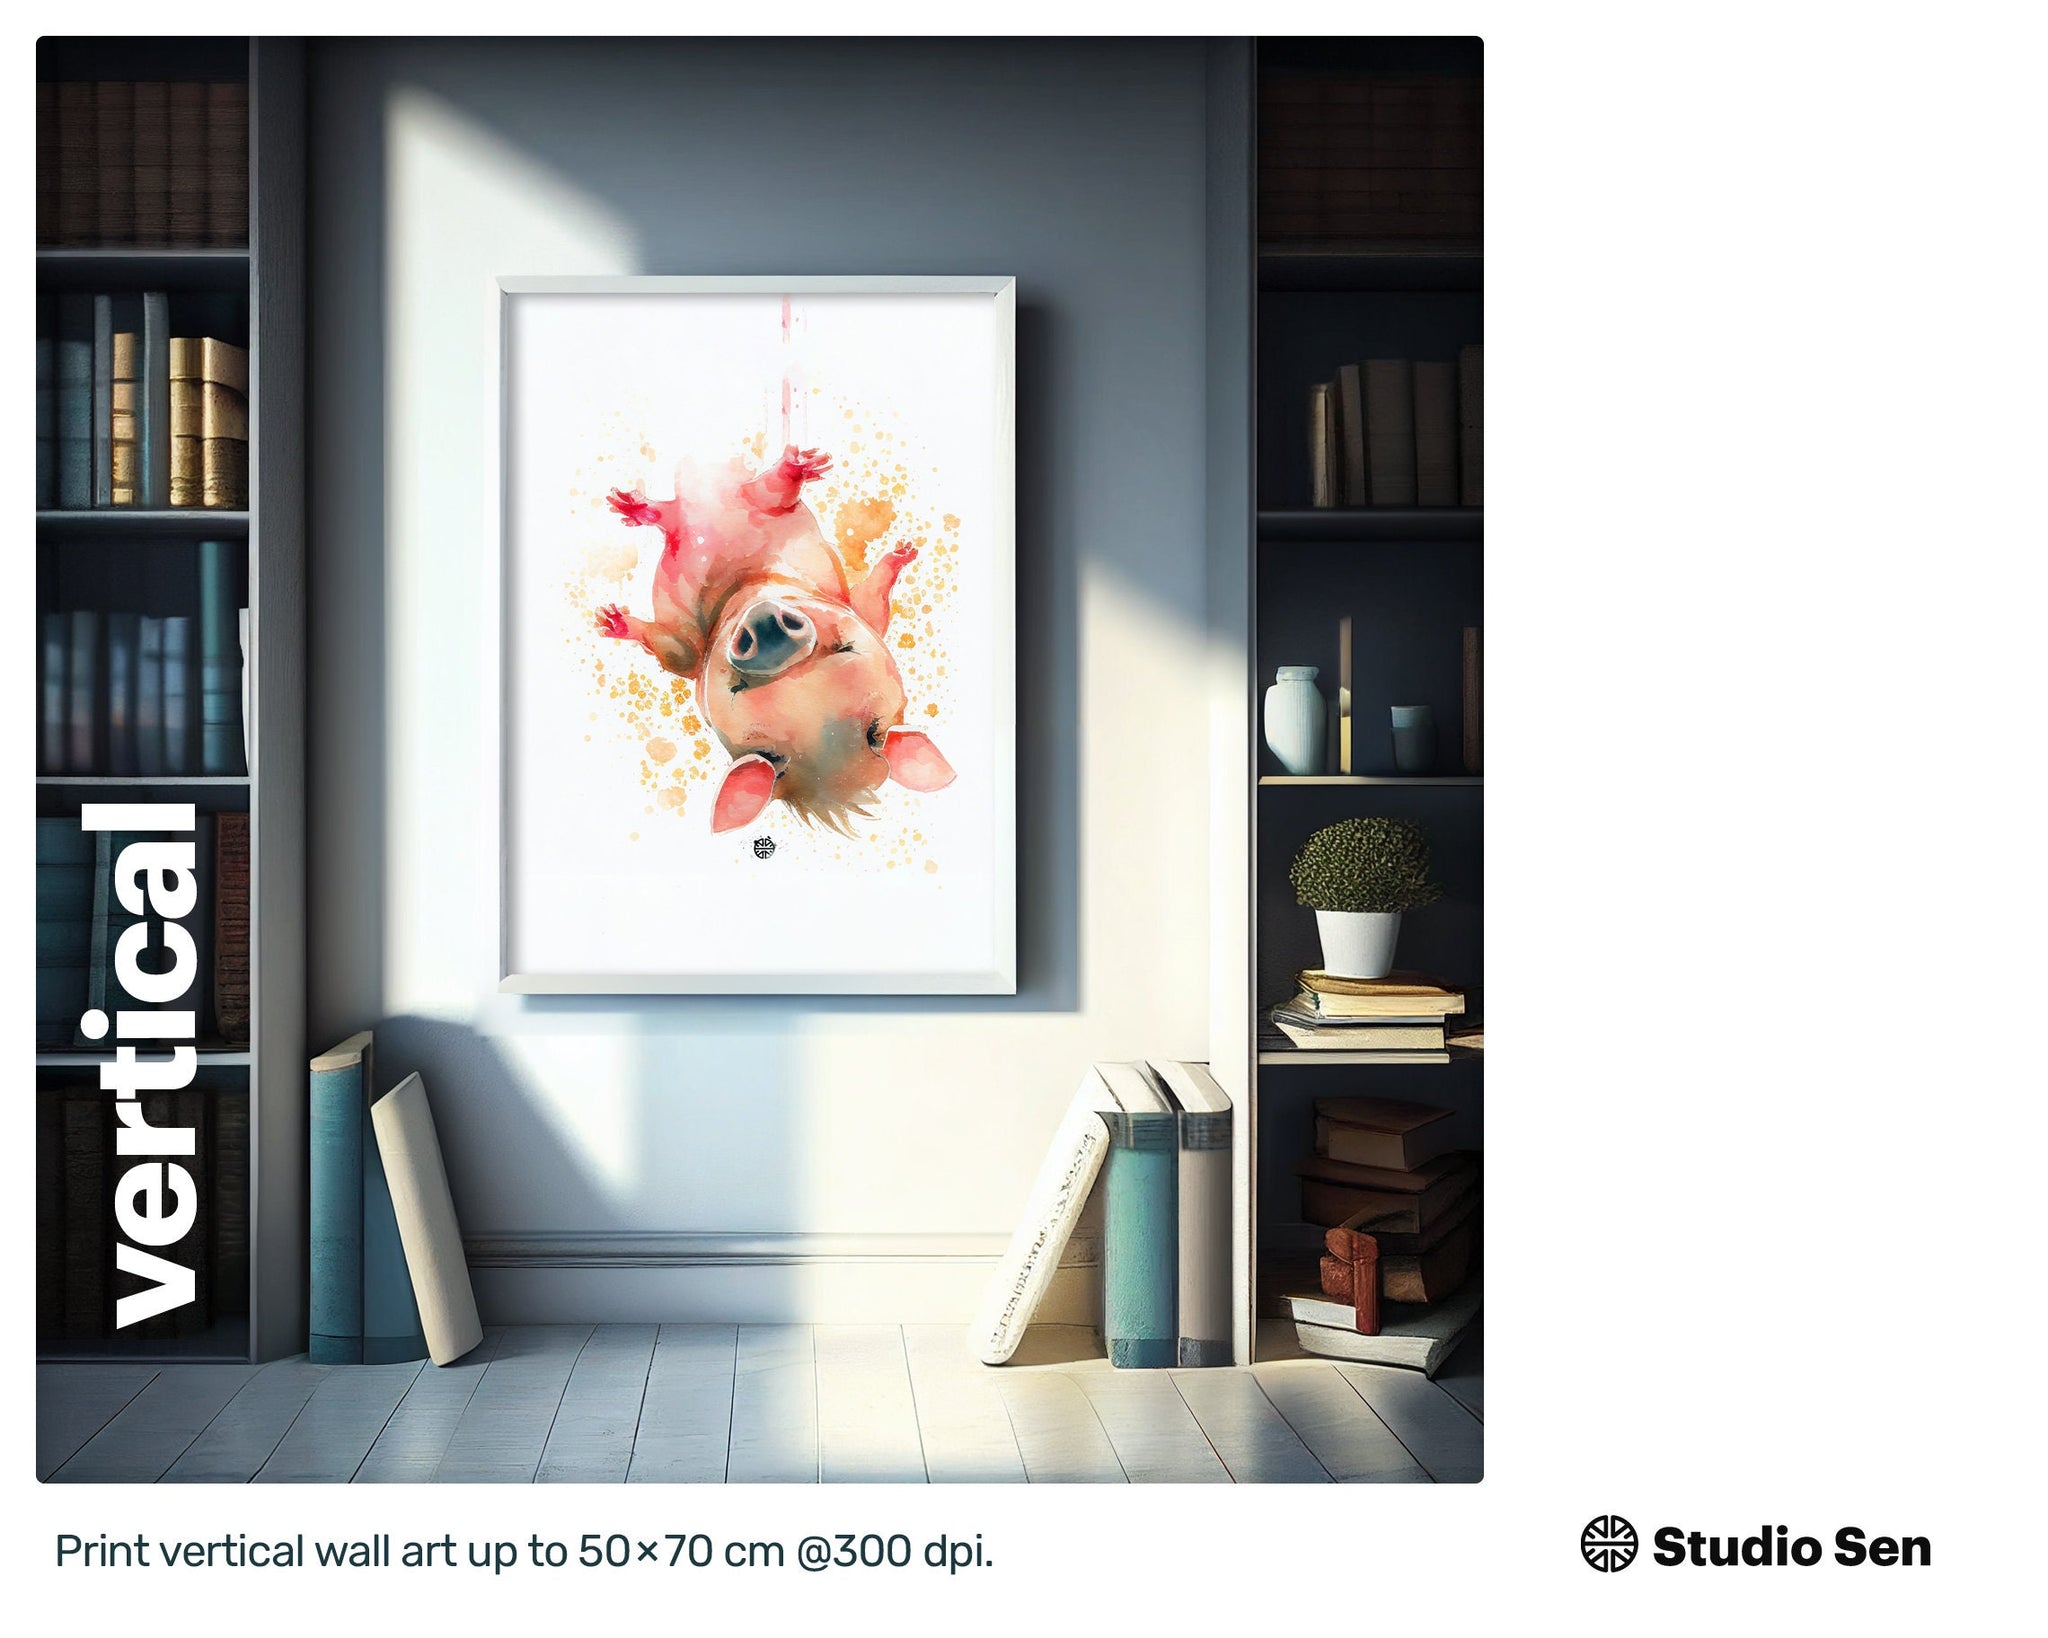 PIG PAINTING, WATERCOLOR Drops And Splashes Instant Download Pig Art Print, Unique Pig Kids Bedroom Wall Decor Print Gift For Pig Lovers